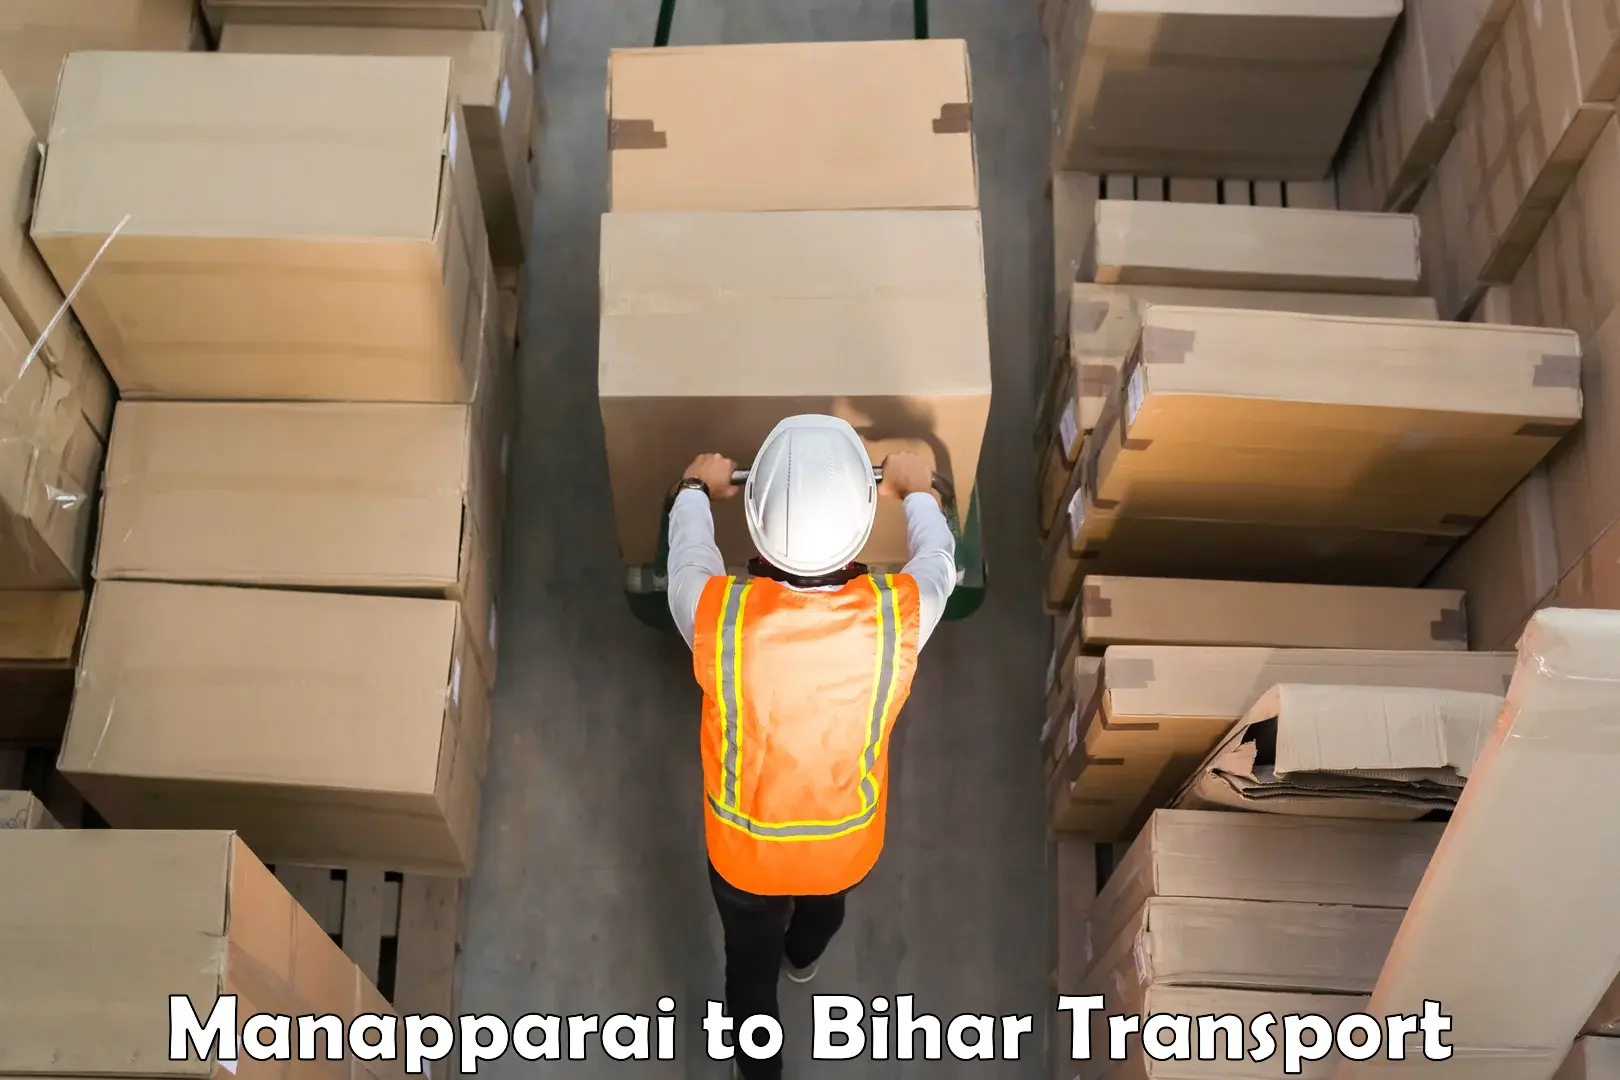 Parcel transport services Manapparai to Dhaka